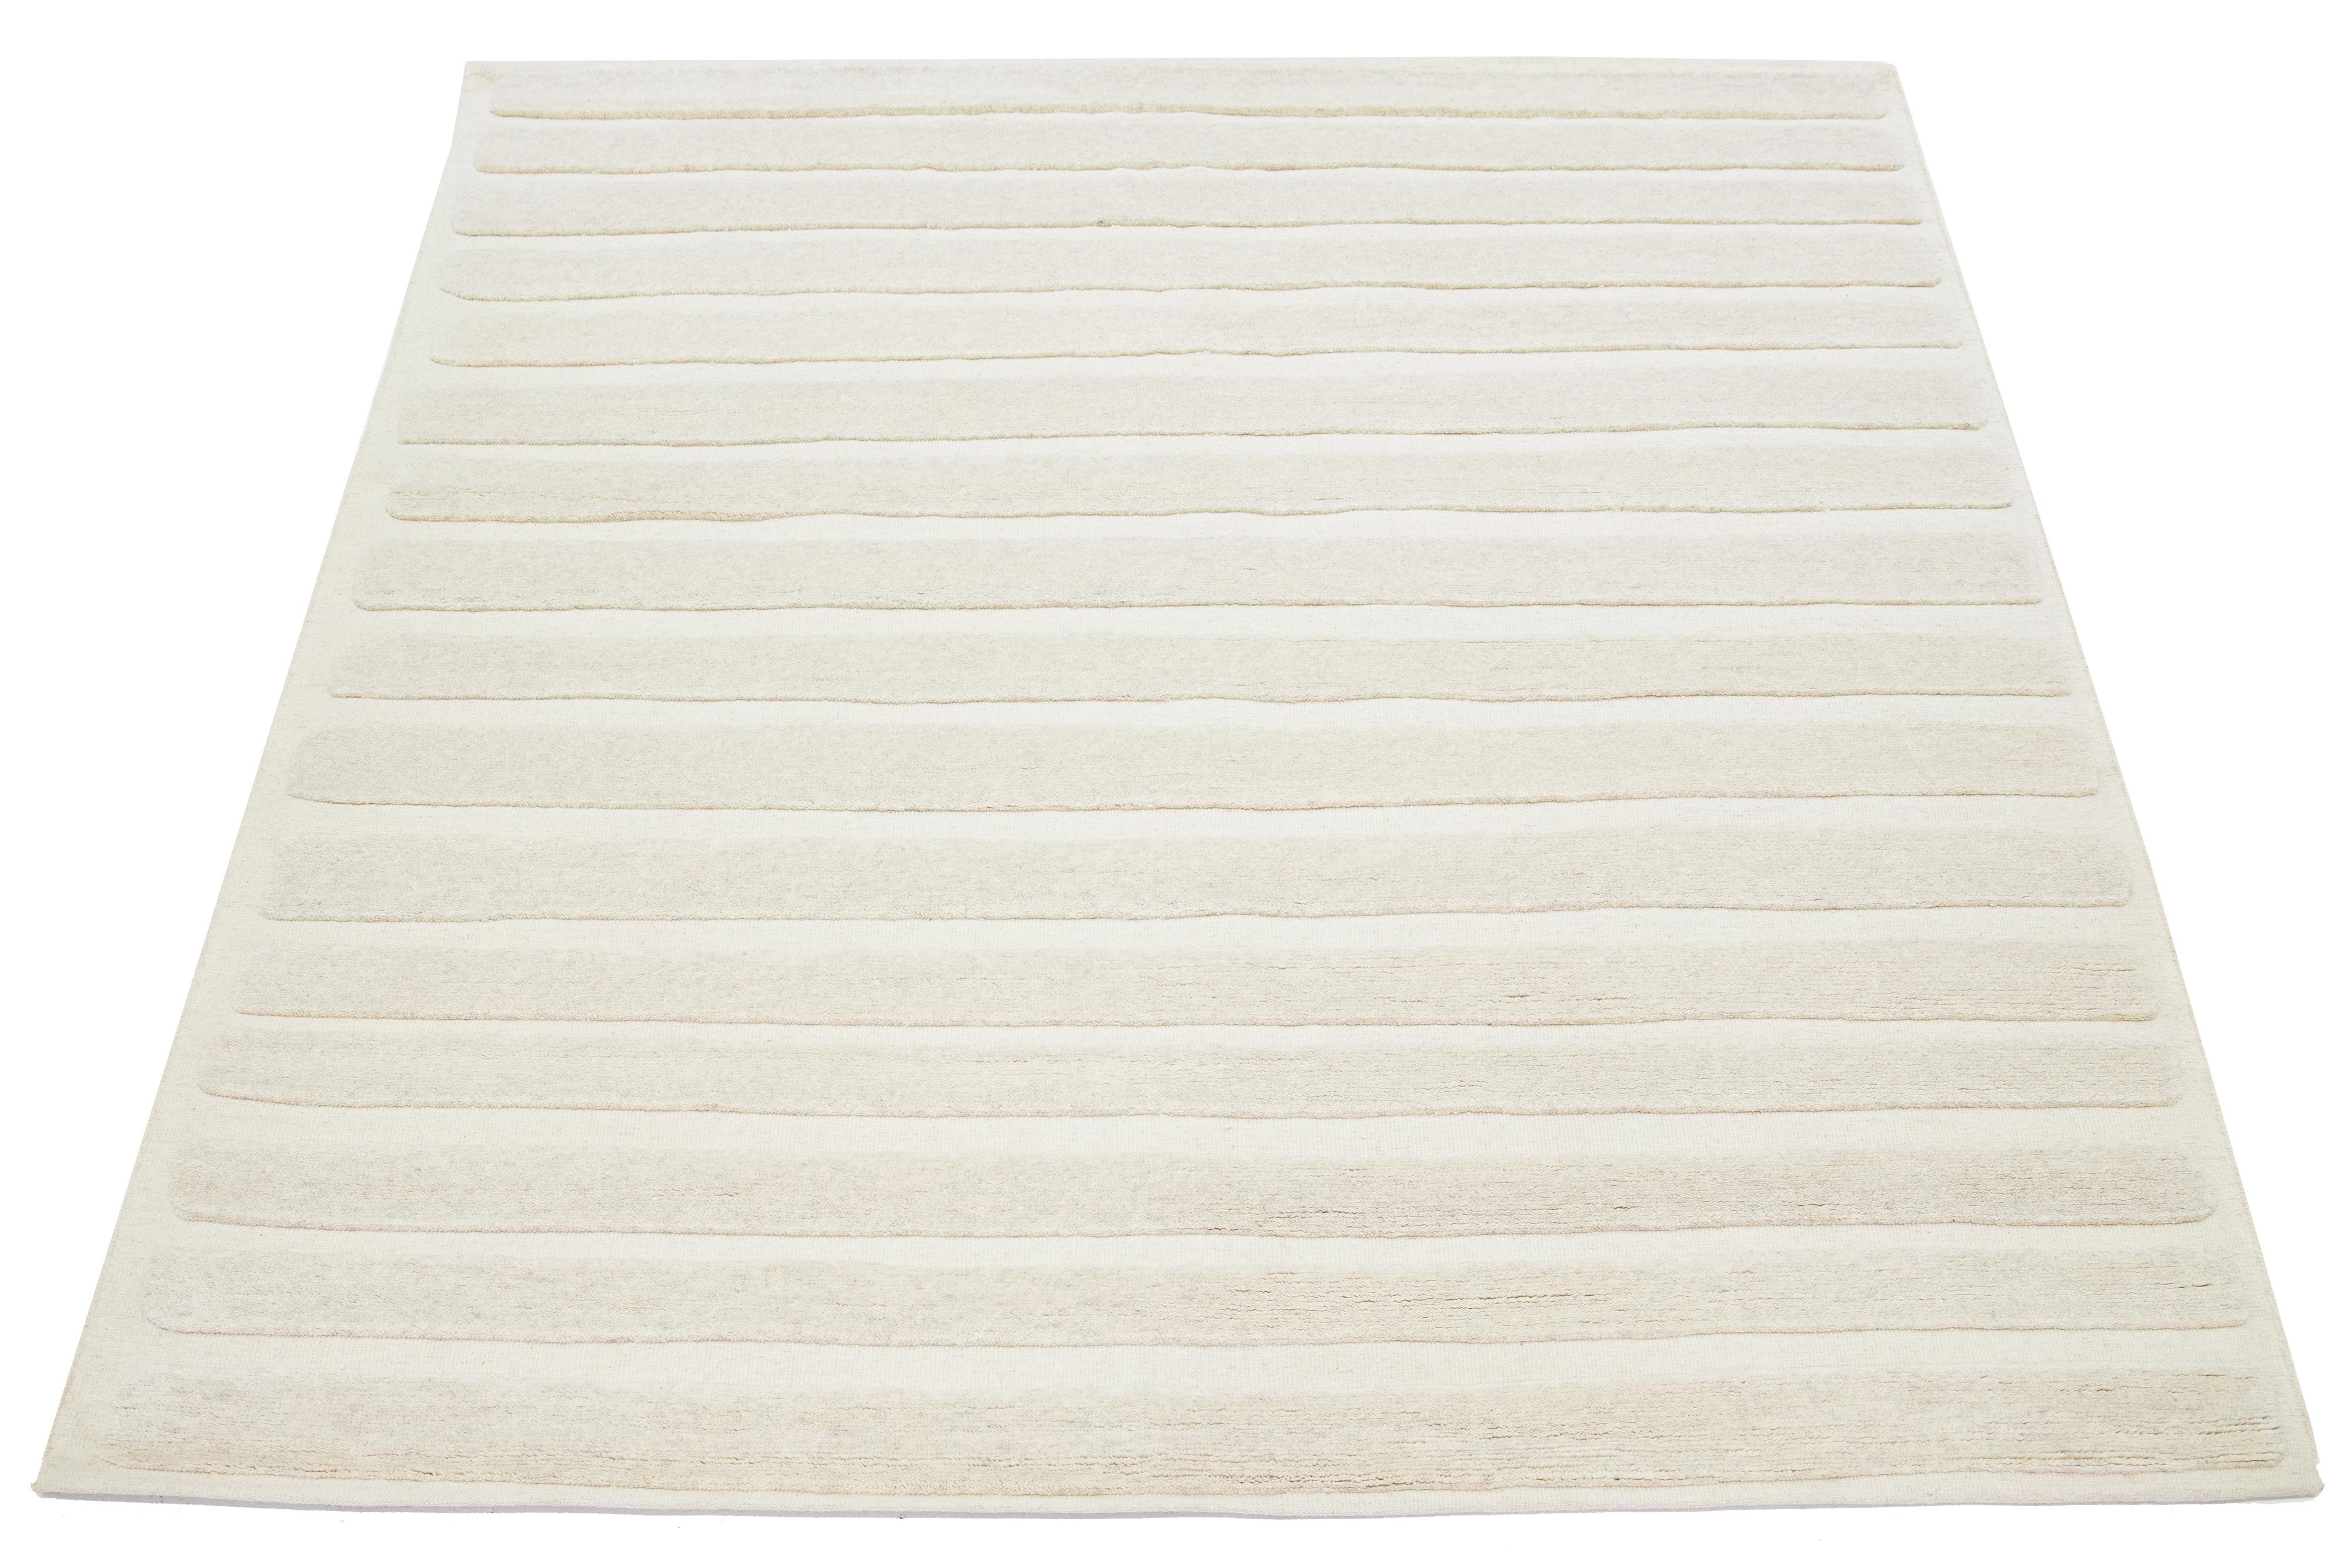 This hand-knotted rug in a Moroccan style is made of wool and features a mesmerizing minimalist aesthetic. It is designed with contemporary stripes on a natural ivory background.

This rug measures 8'2